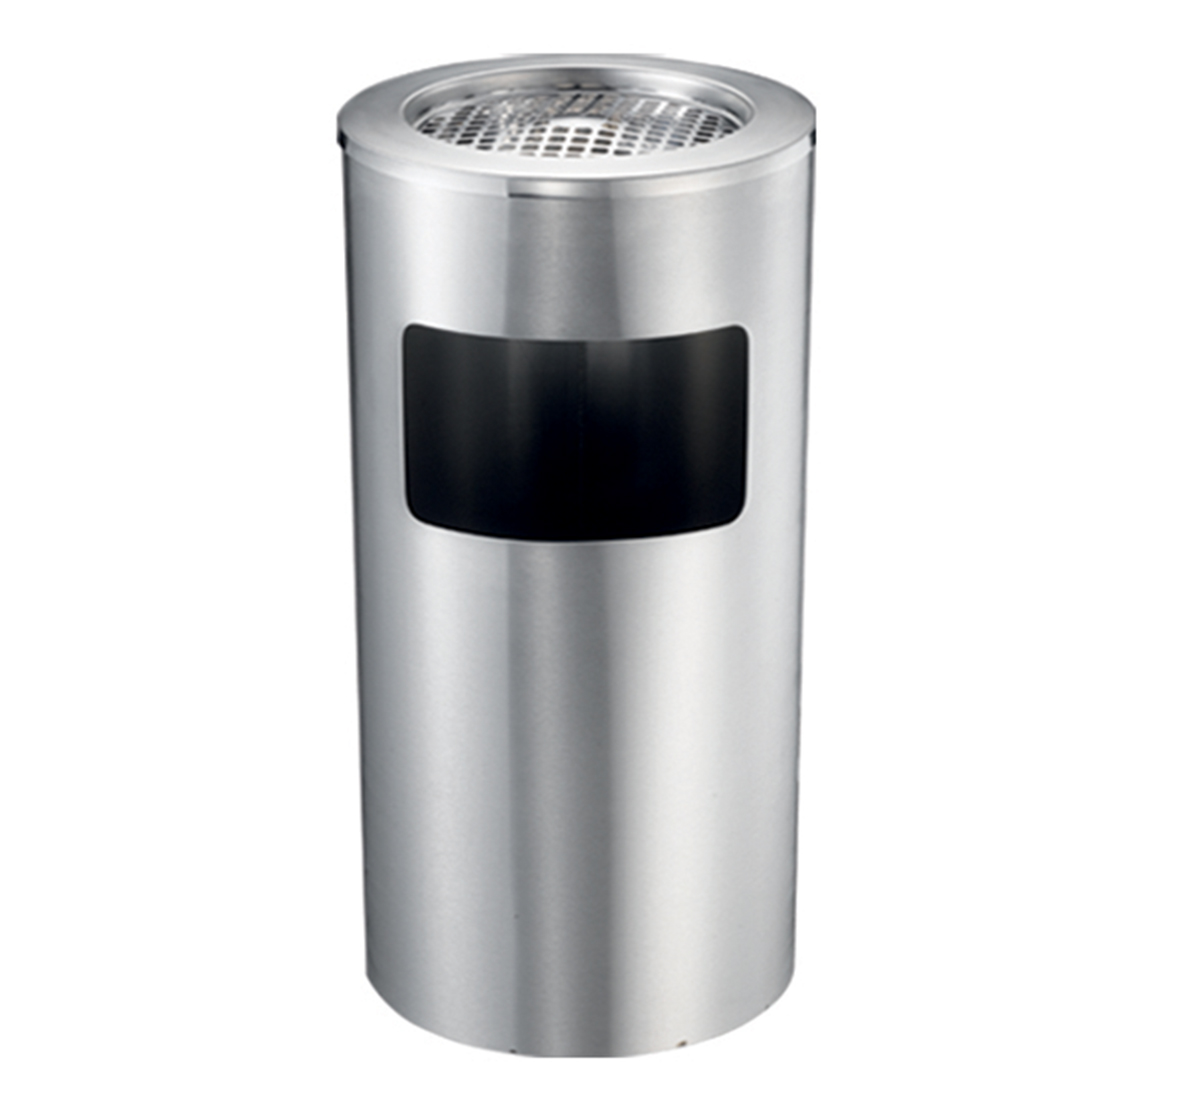 Stainless Steel Ashtray With Bin For Hotel